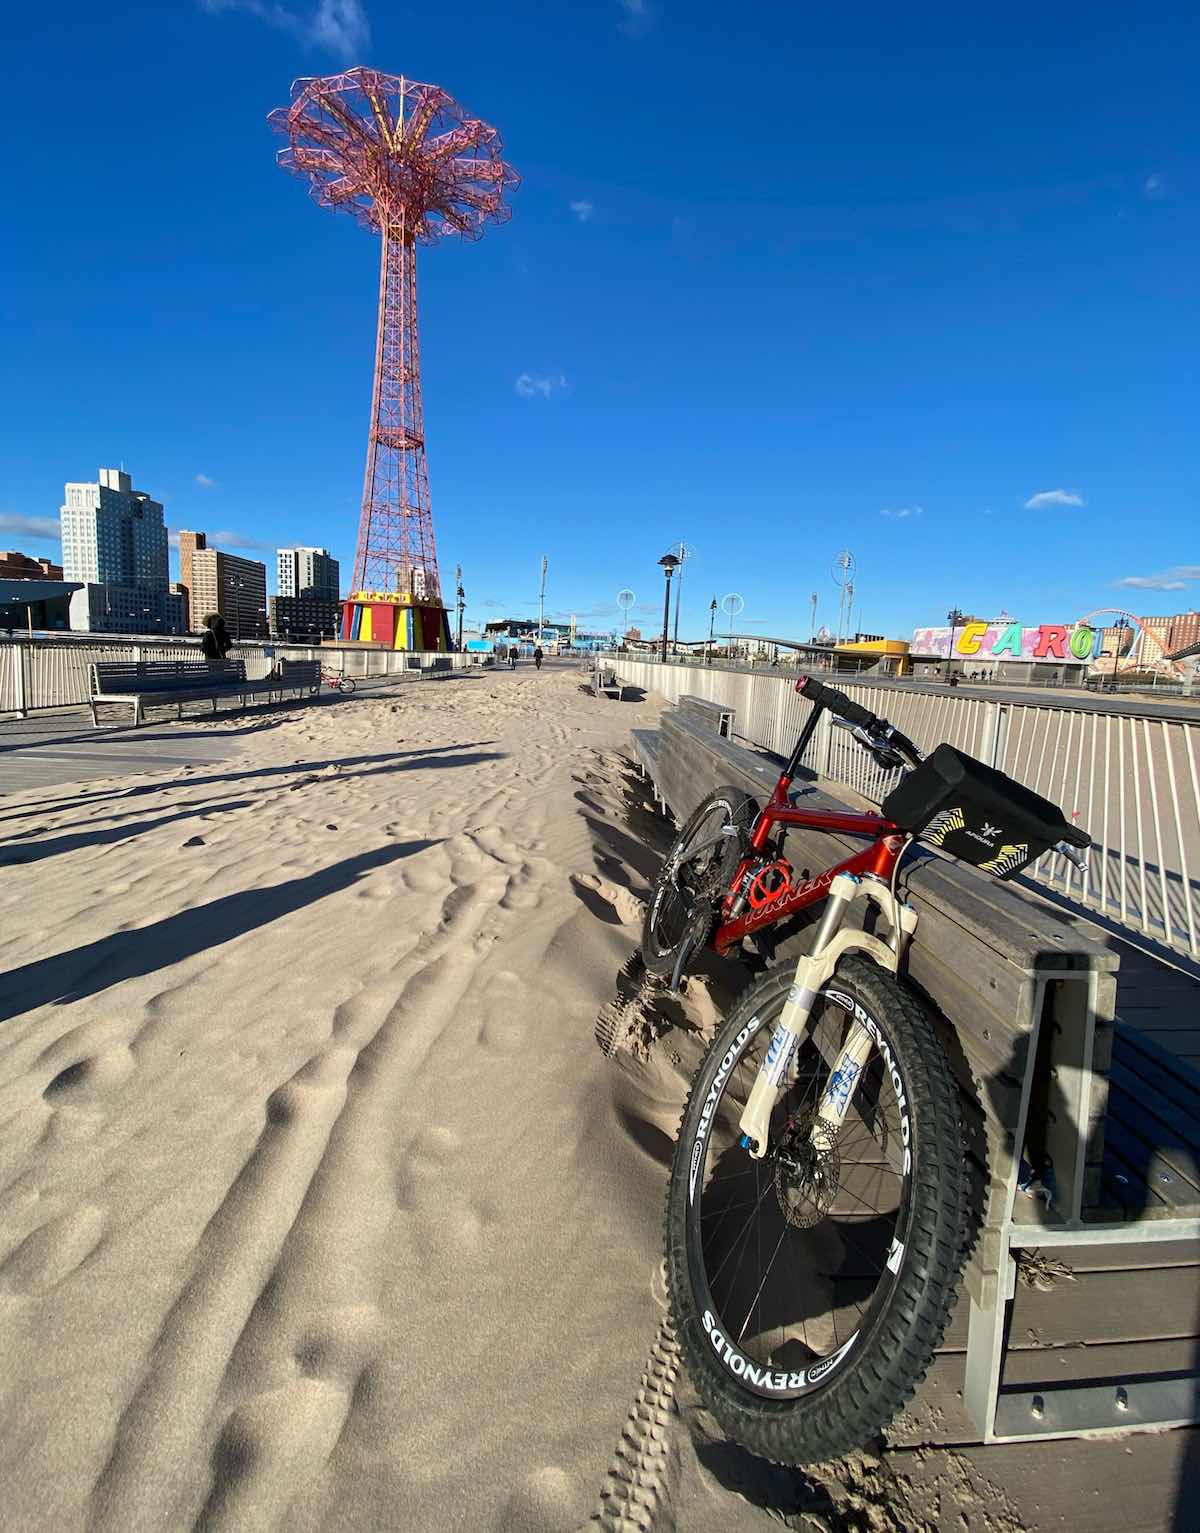 bikerumor pic of the day a mountain bike leans against a bench on the boardwalk of coney island there is sand covering the boardwalk and carnival rides in the distance, it is a clear bright winter day and the shadows are long.